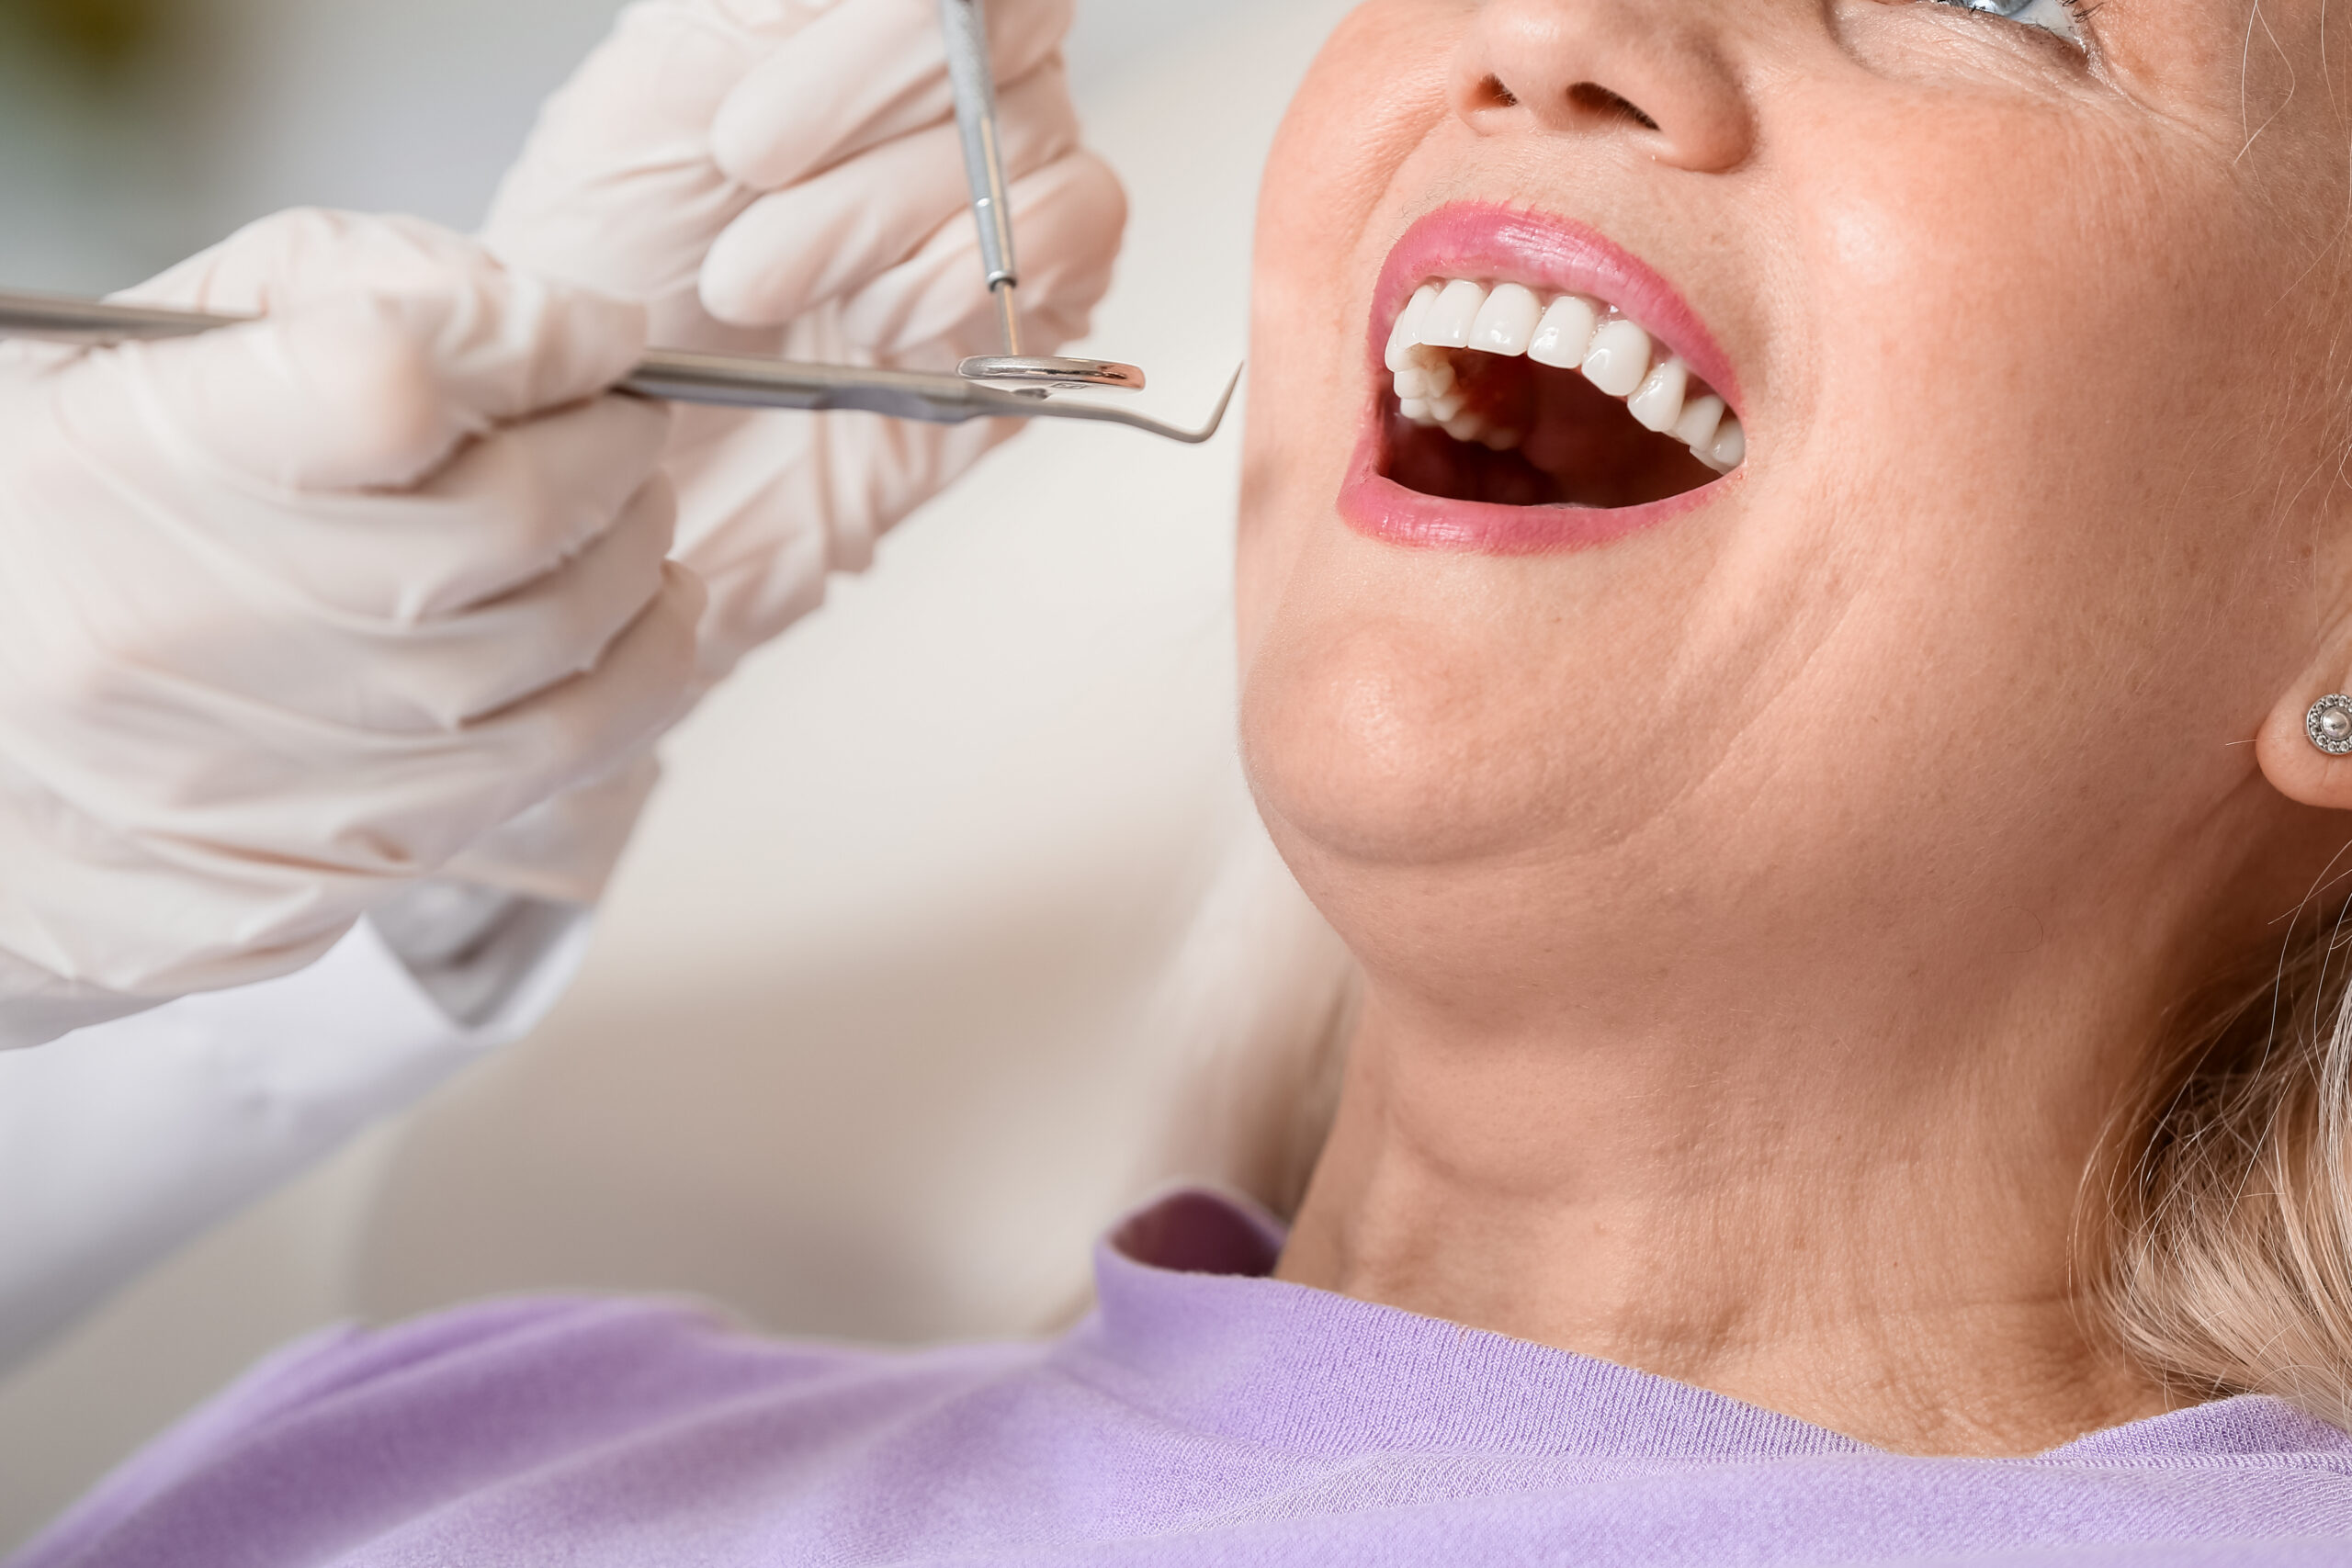 Mature woman visiting dentist in clinic